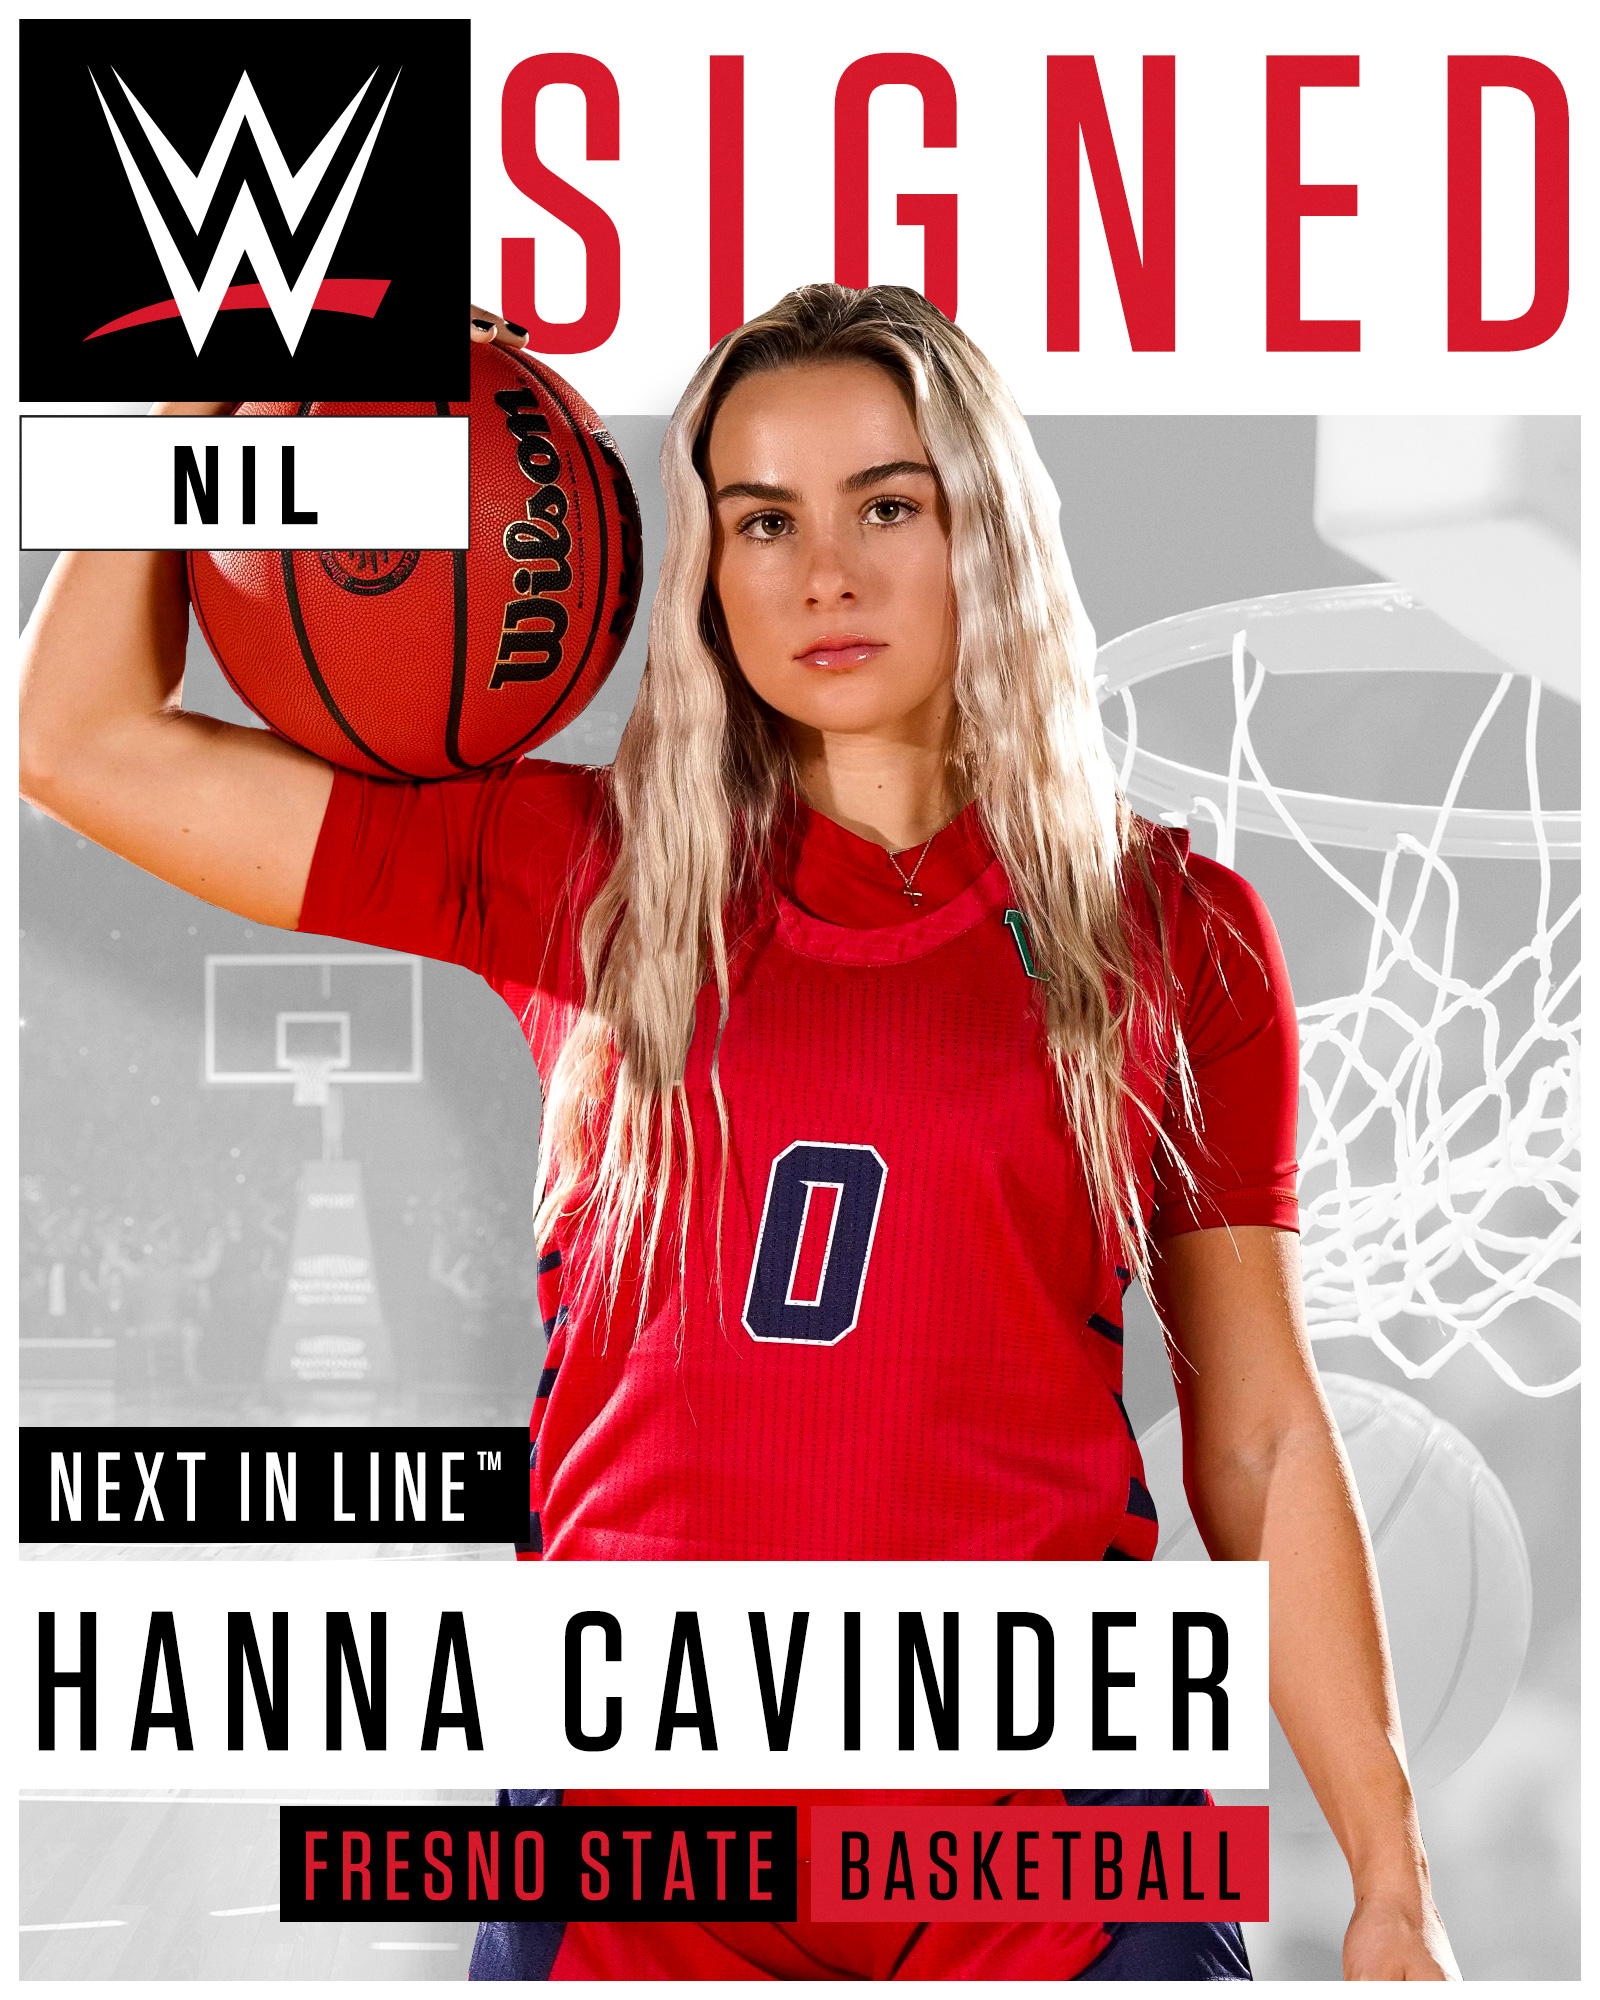 Fresno State guard Hanna Cavinder has signed a name, image and likeness (NIL) deal with the WWE (WWE)